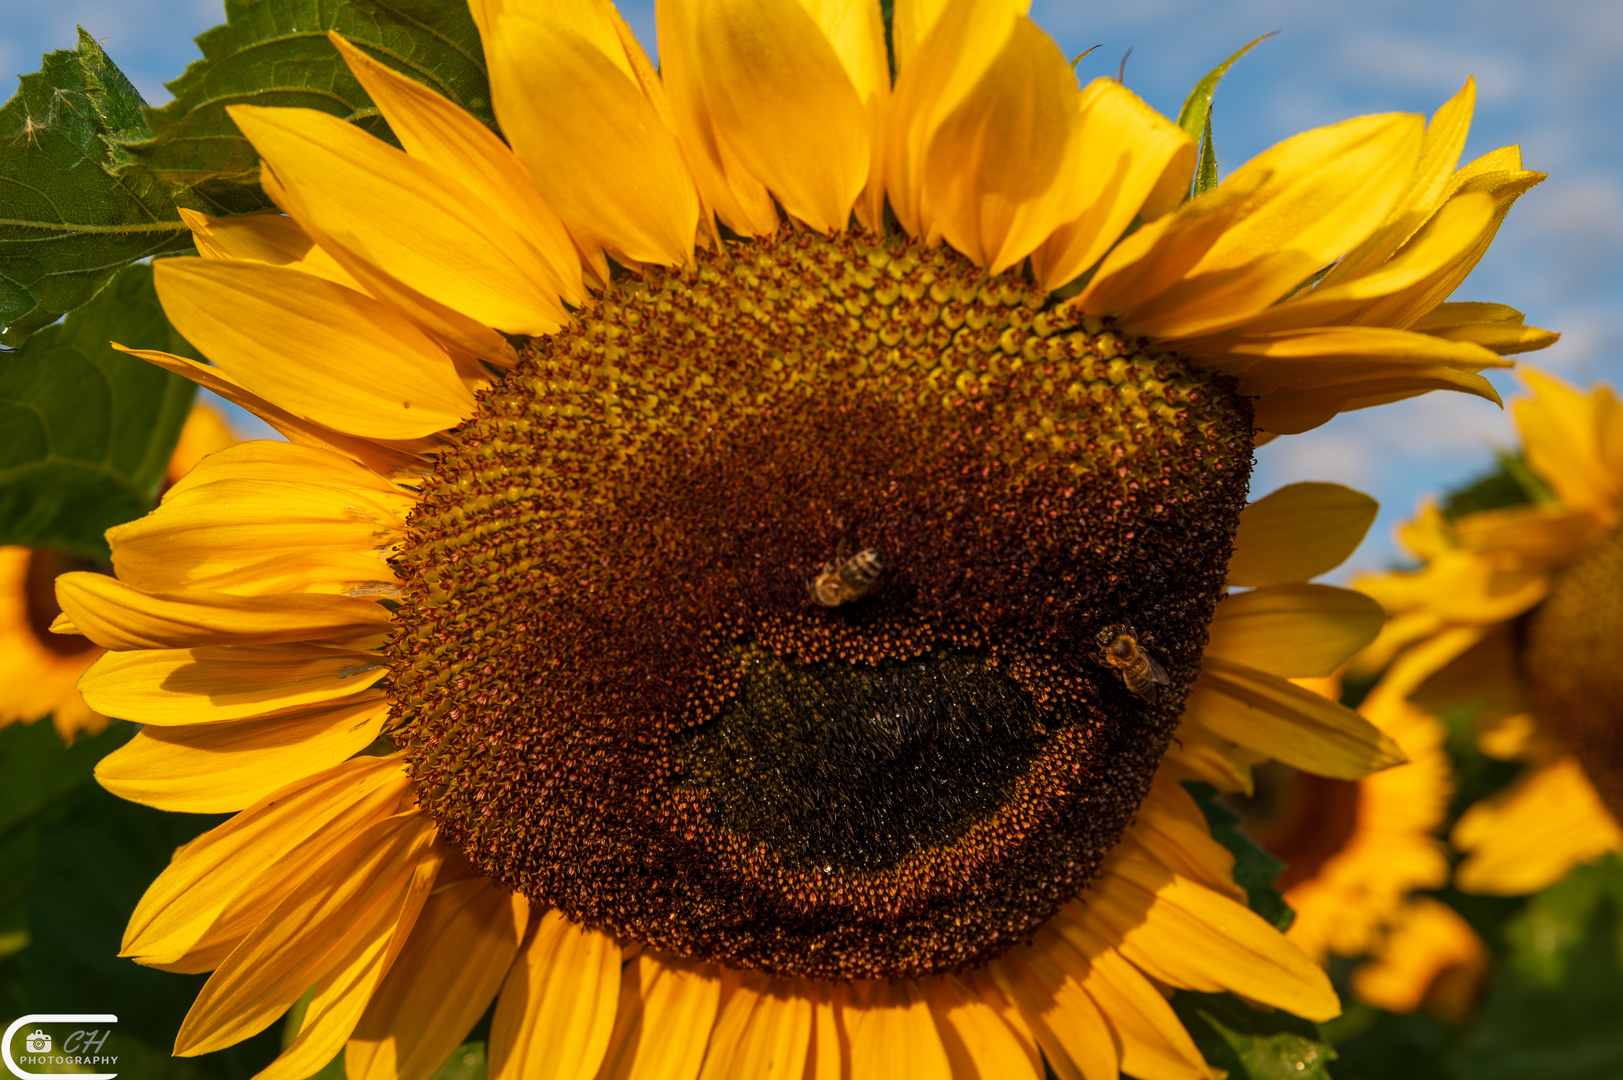 Laughing sunflower